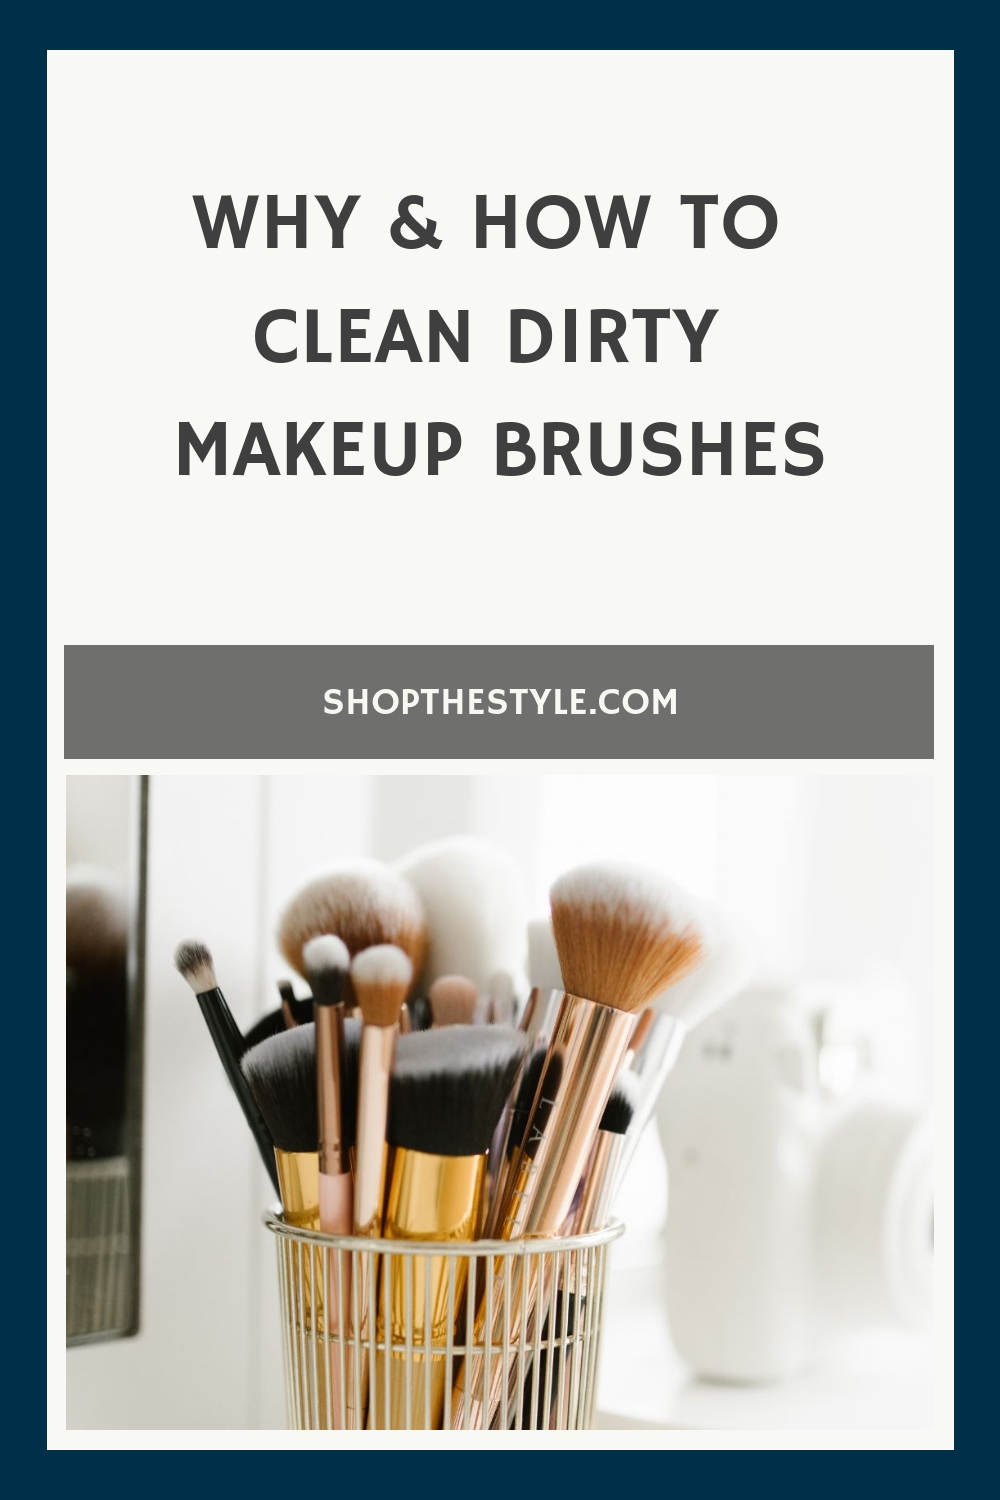 Why & How To Clean Dirty Makeup Brushes